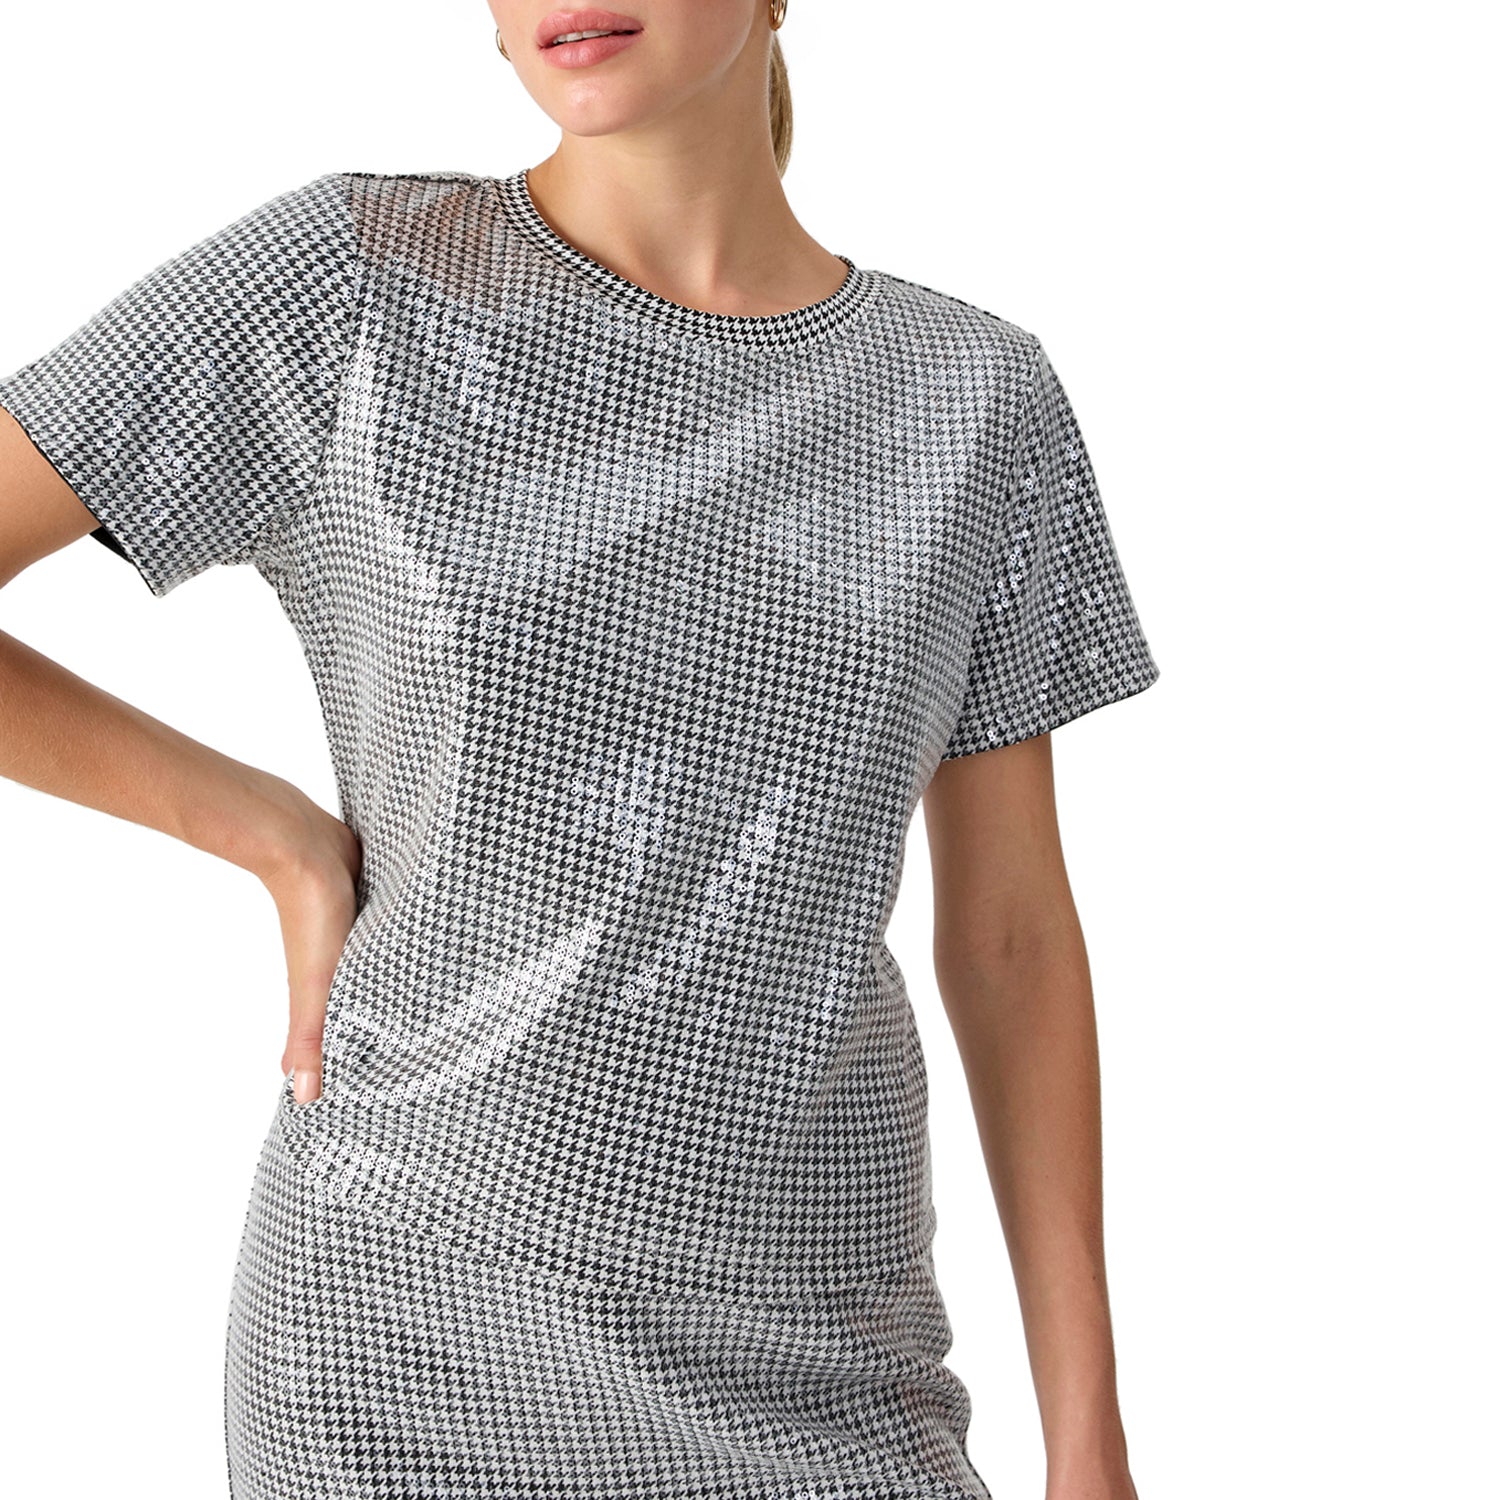 Sanctuary Perfect Sequin Tee - Micro Houndstooth Clothing - Tops - Shirts - SS Knits by Sanctuary | Grace the Boutique